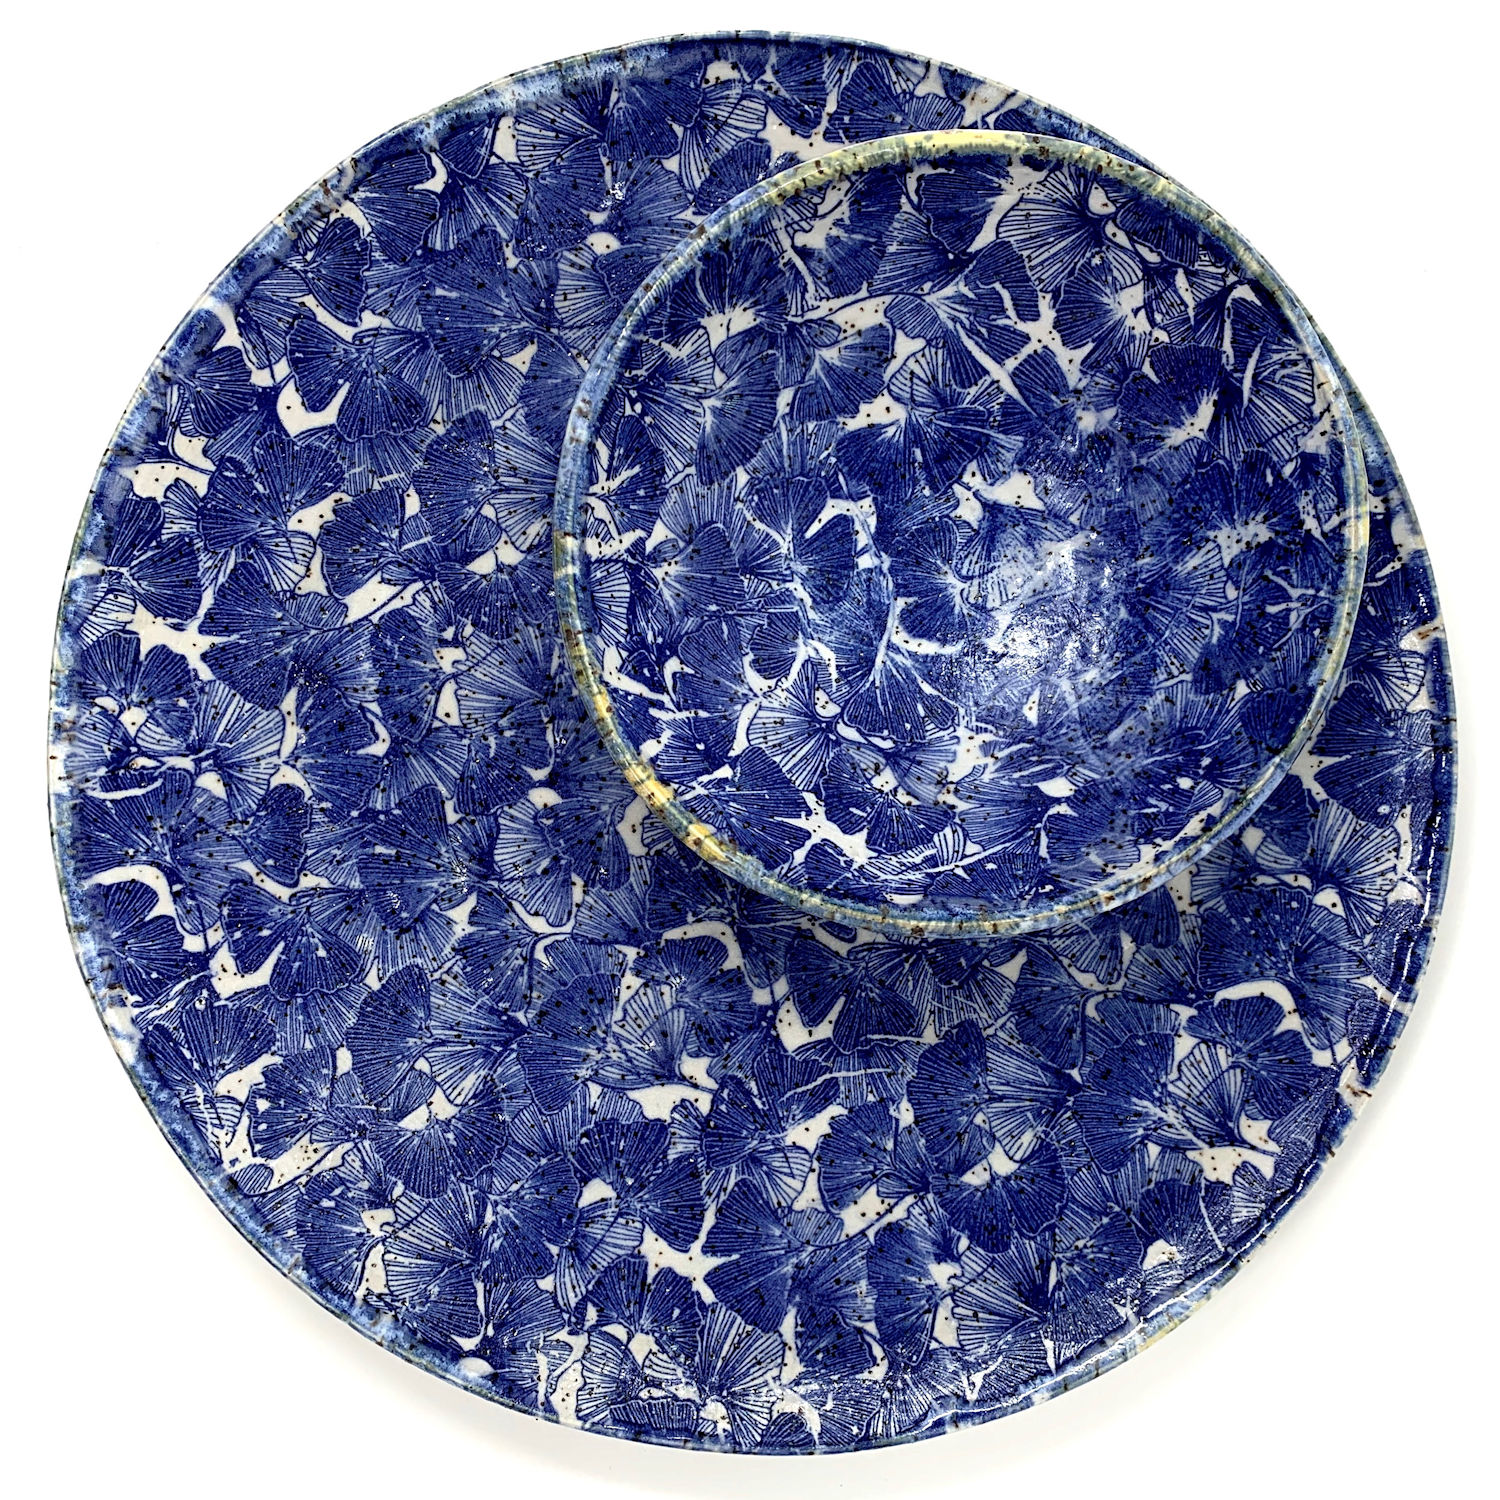 This chip n' dip cover features a vibrant blue botanical print, rich in detail, evoking a sense of a lush garden in full bloom. The bold pattern contrasts beautifully against the white background, making it both a functional serving piece and a statement artwork for any gathering.